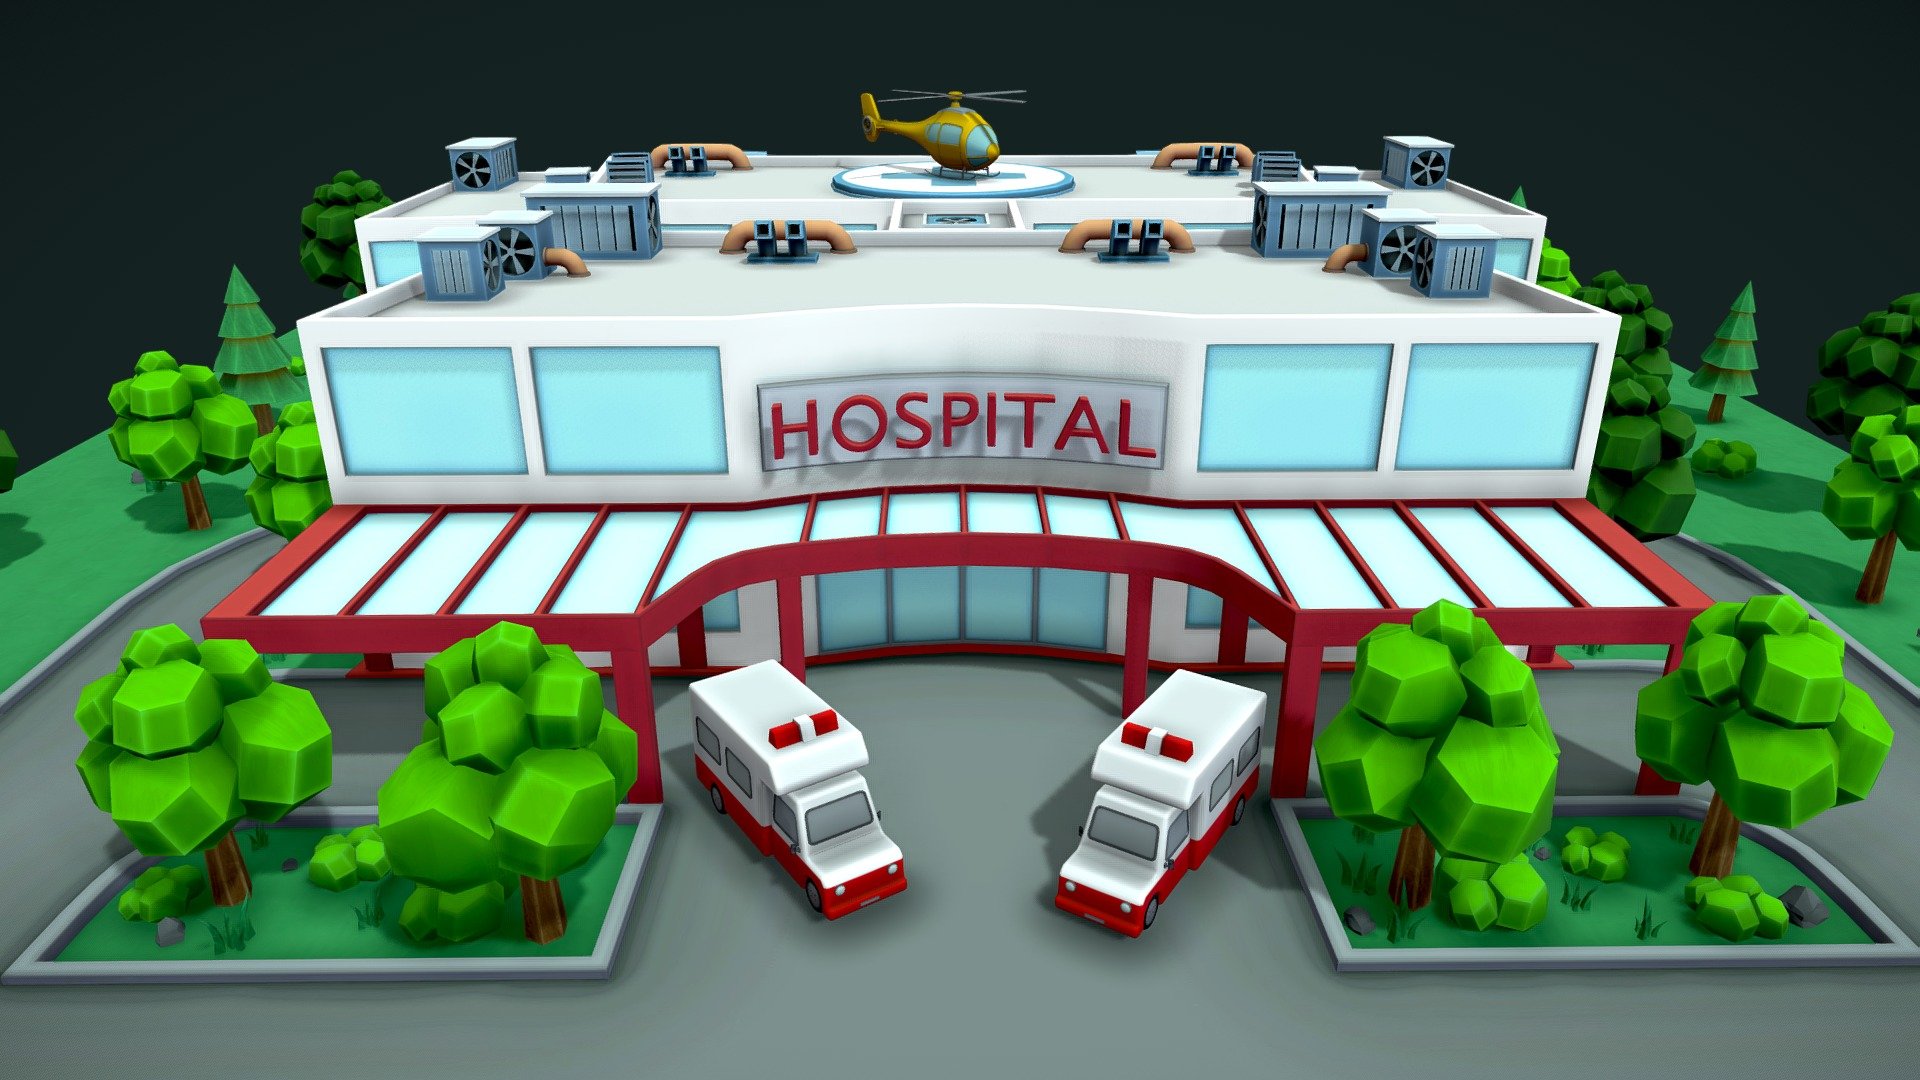 Modeled in Maya. 
Textures designed in Substance Painter. 
Texture resolution is 4K &amp; 2K(Ambulance only).

For more information: 
https://www.artstation.com/infinitymodels - Cartoon Hospital - 3D model by Infinity Models (@infinitymodels) 3d model